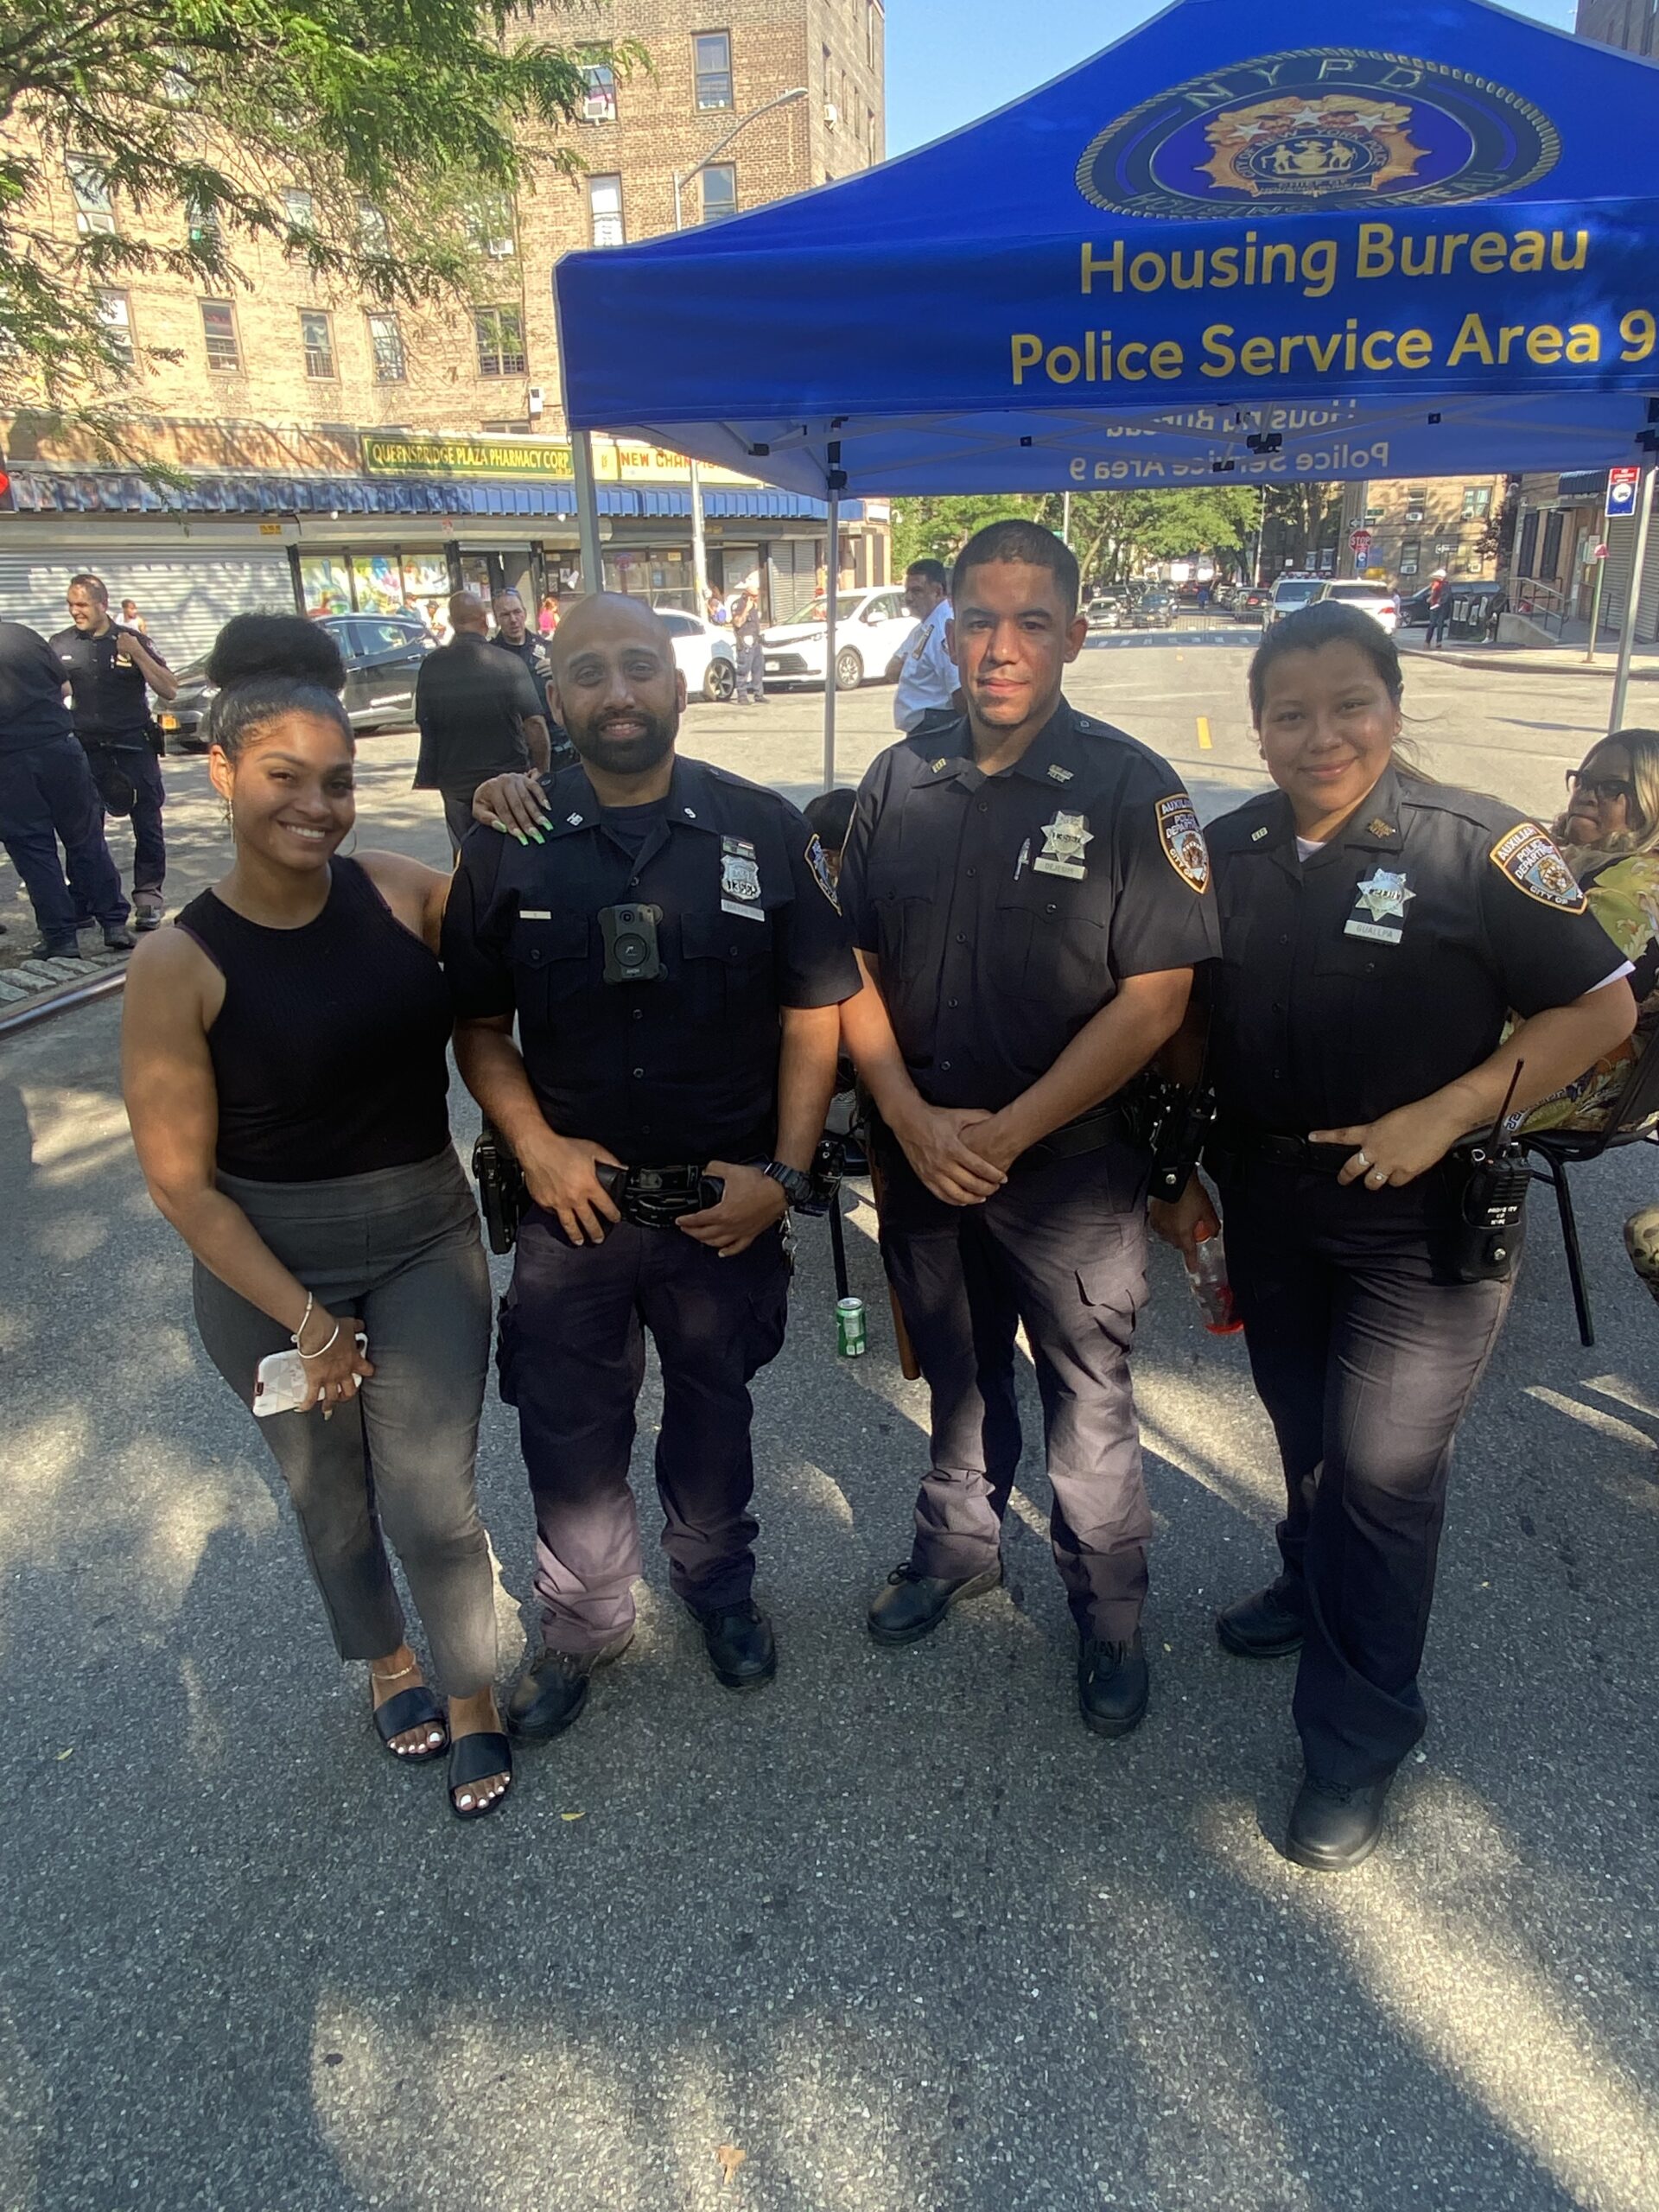 three police officers and a woman